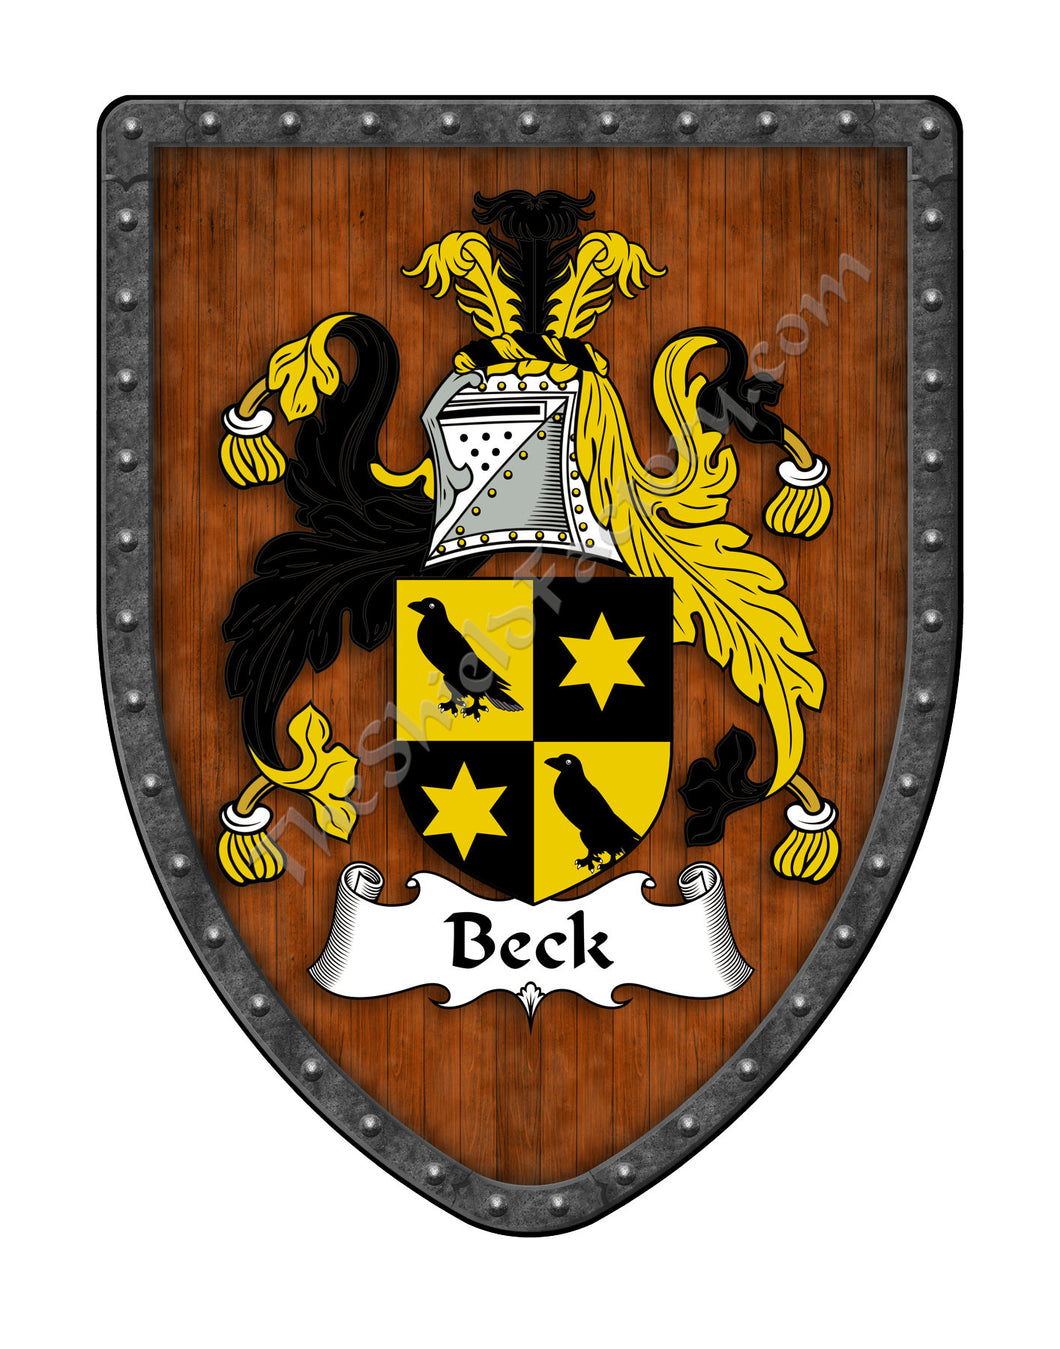 Beck Family Crest Coat of Arms